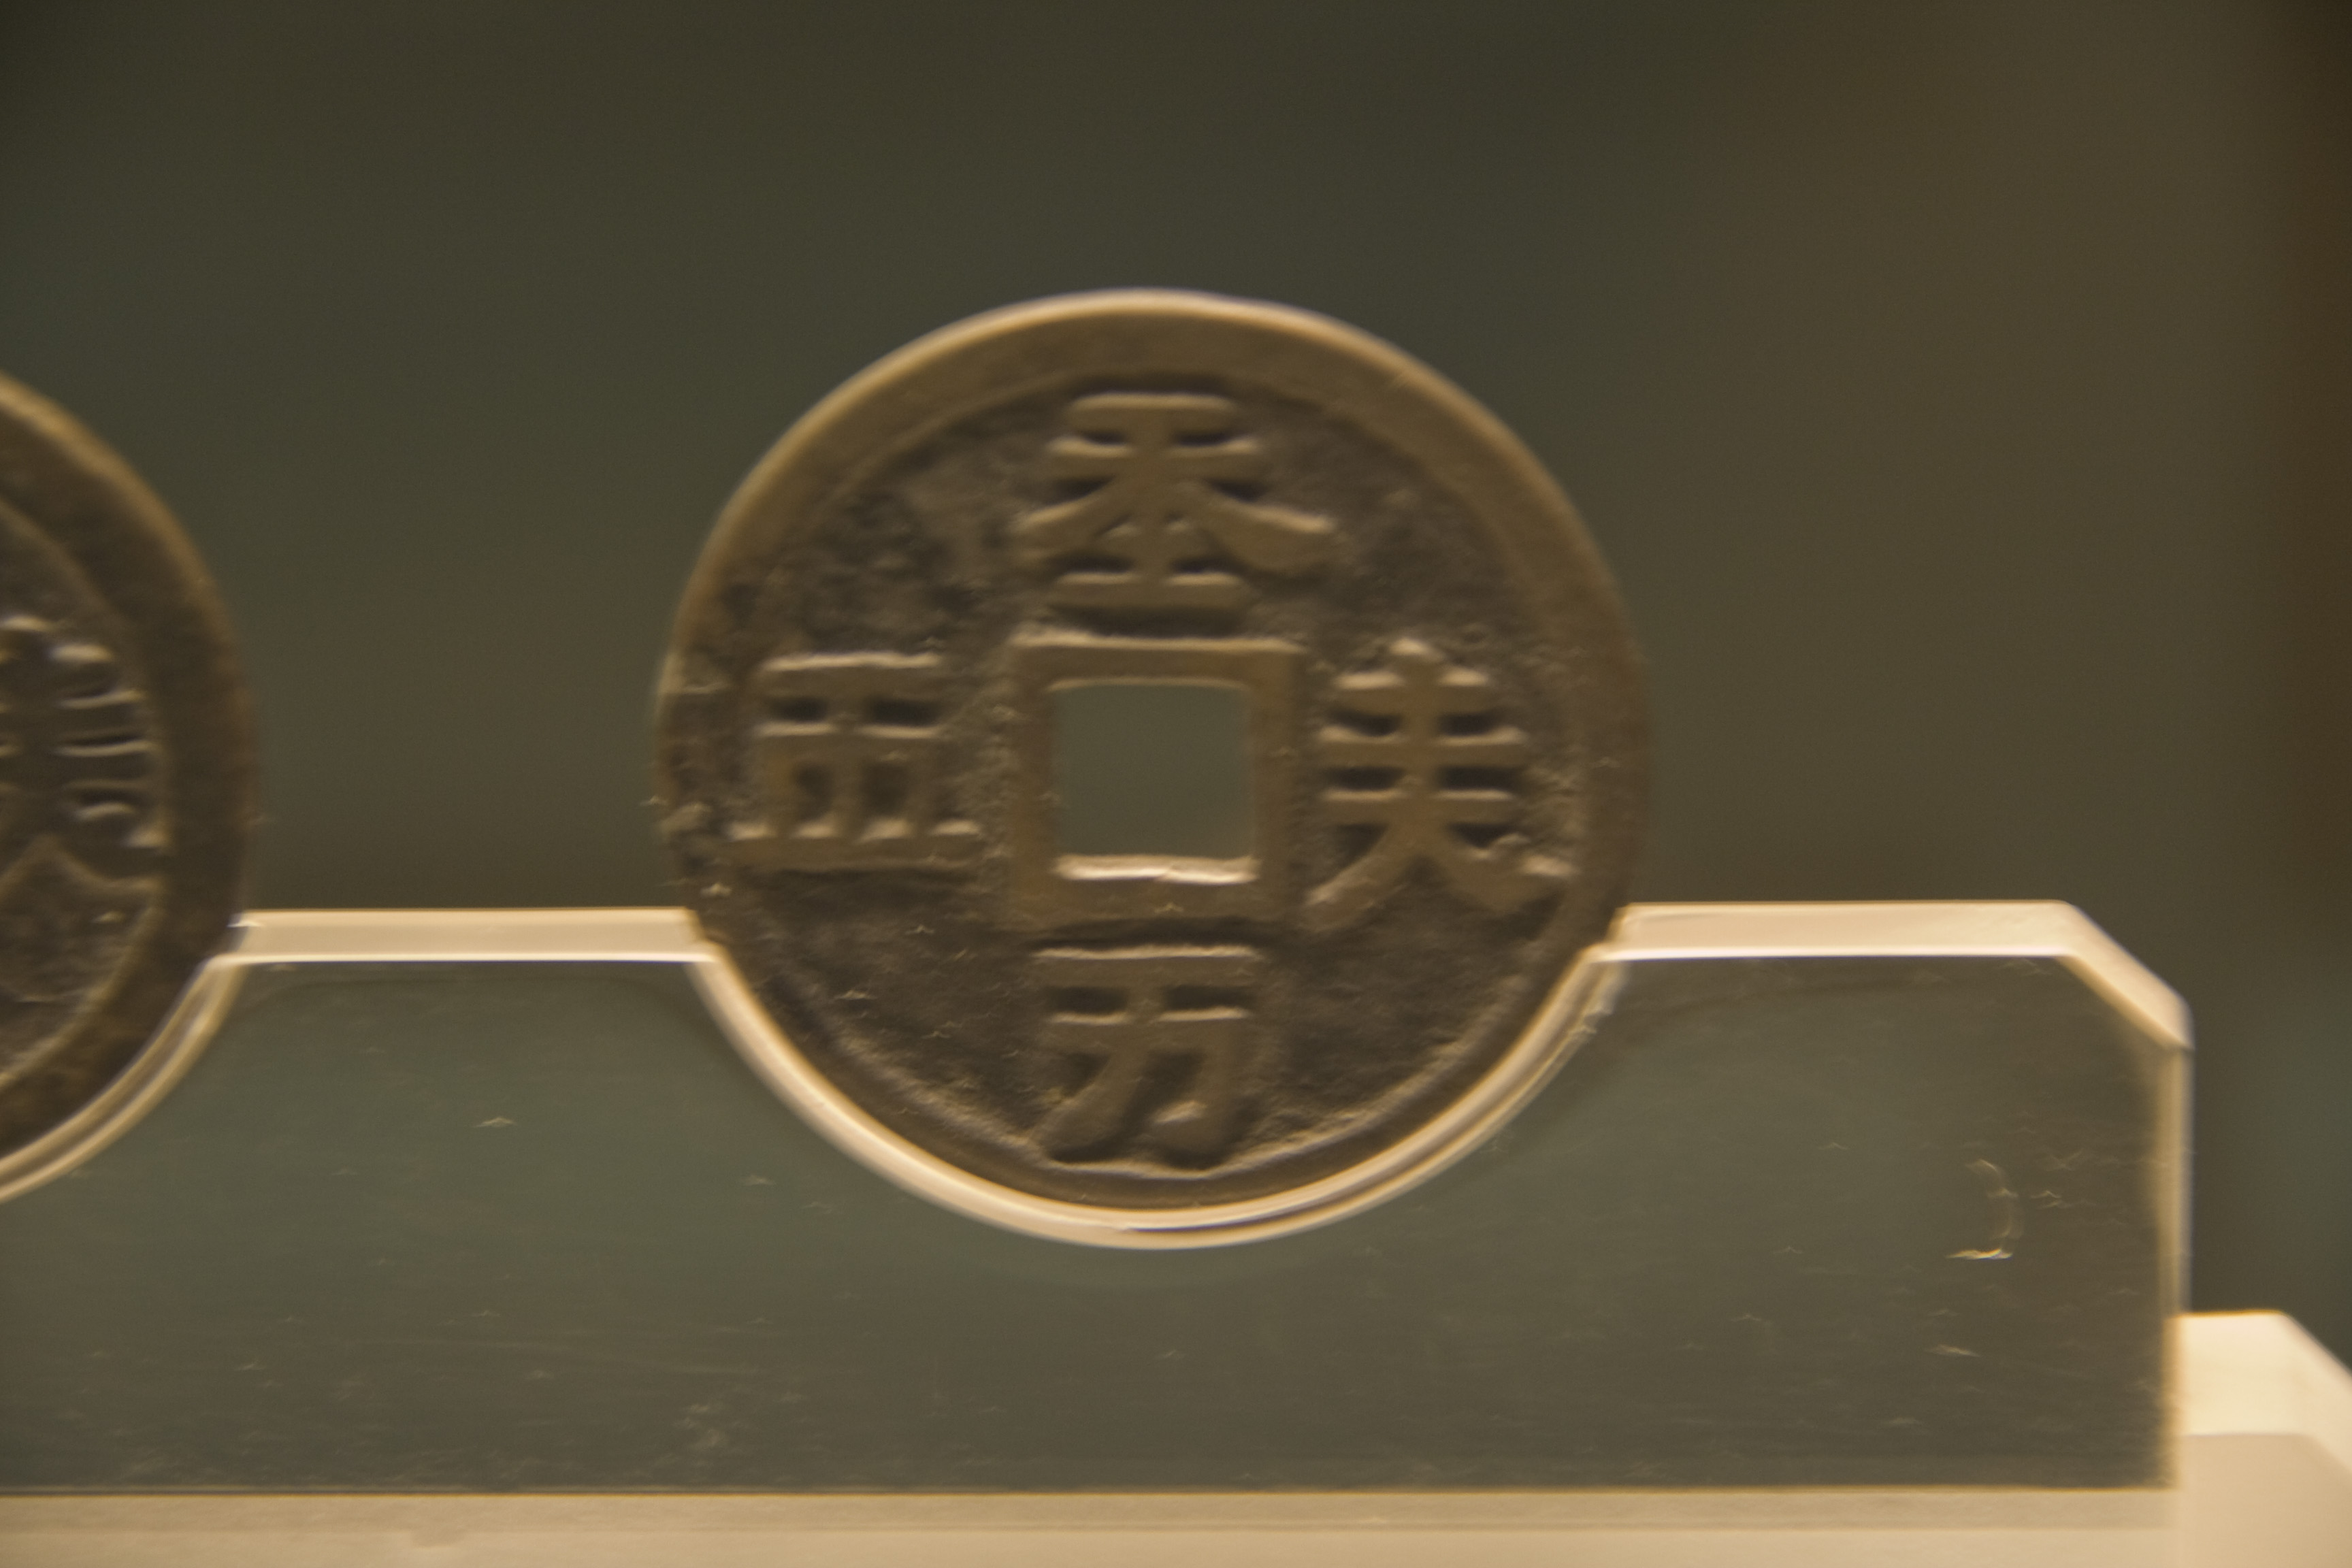 Chinese Numismatic Charm: Most Up-to-Date Encyclopedia, News & Reviews